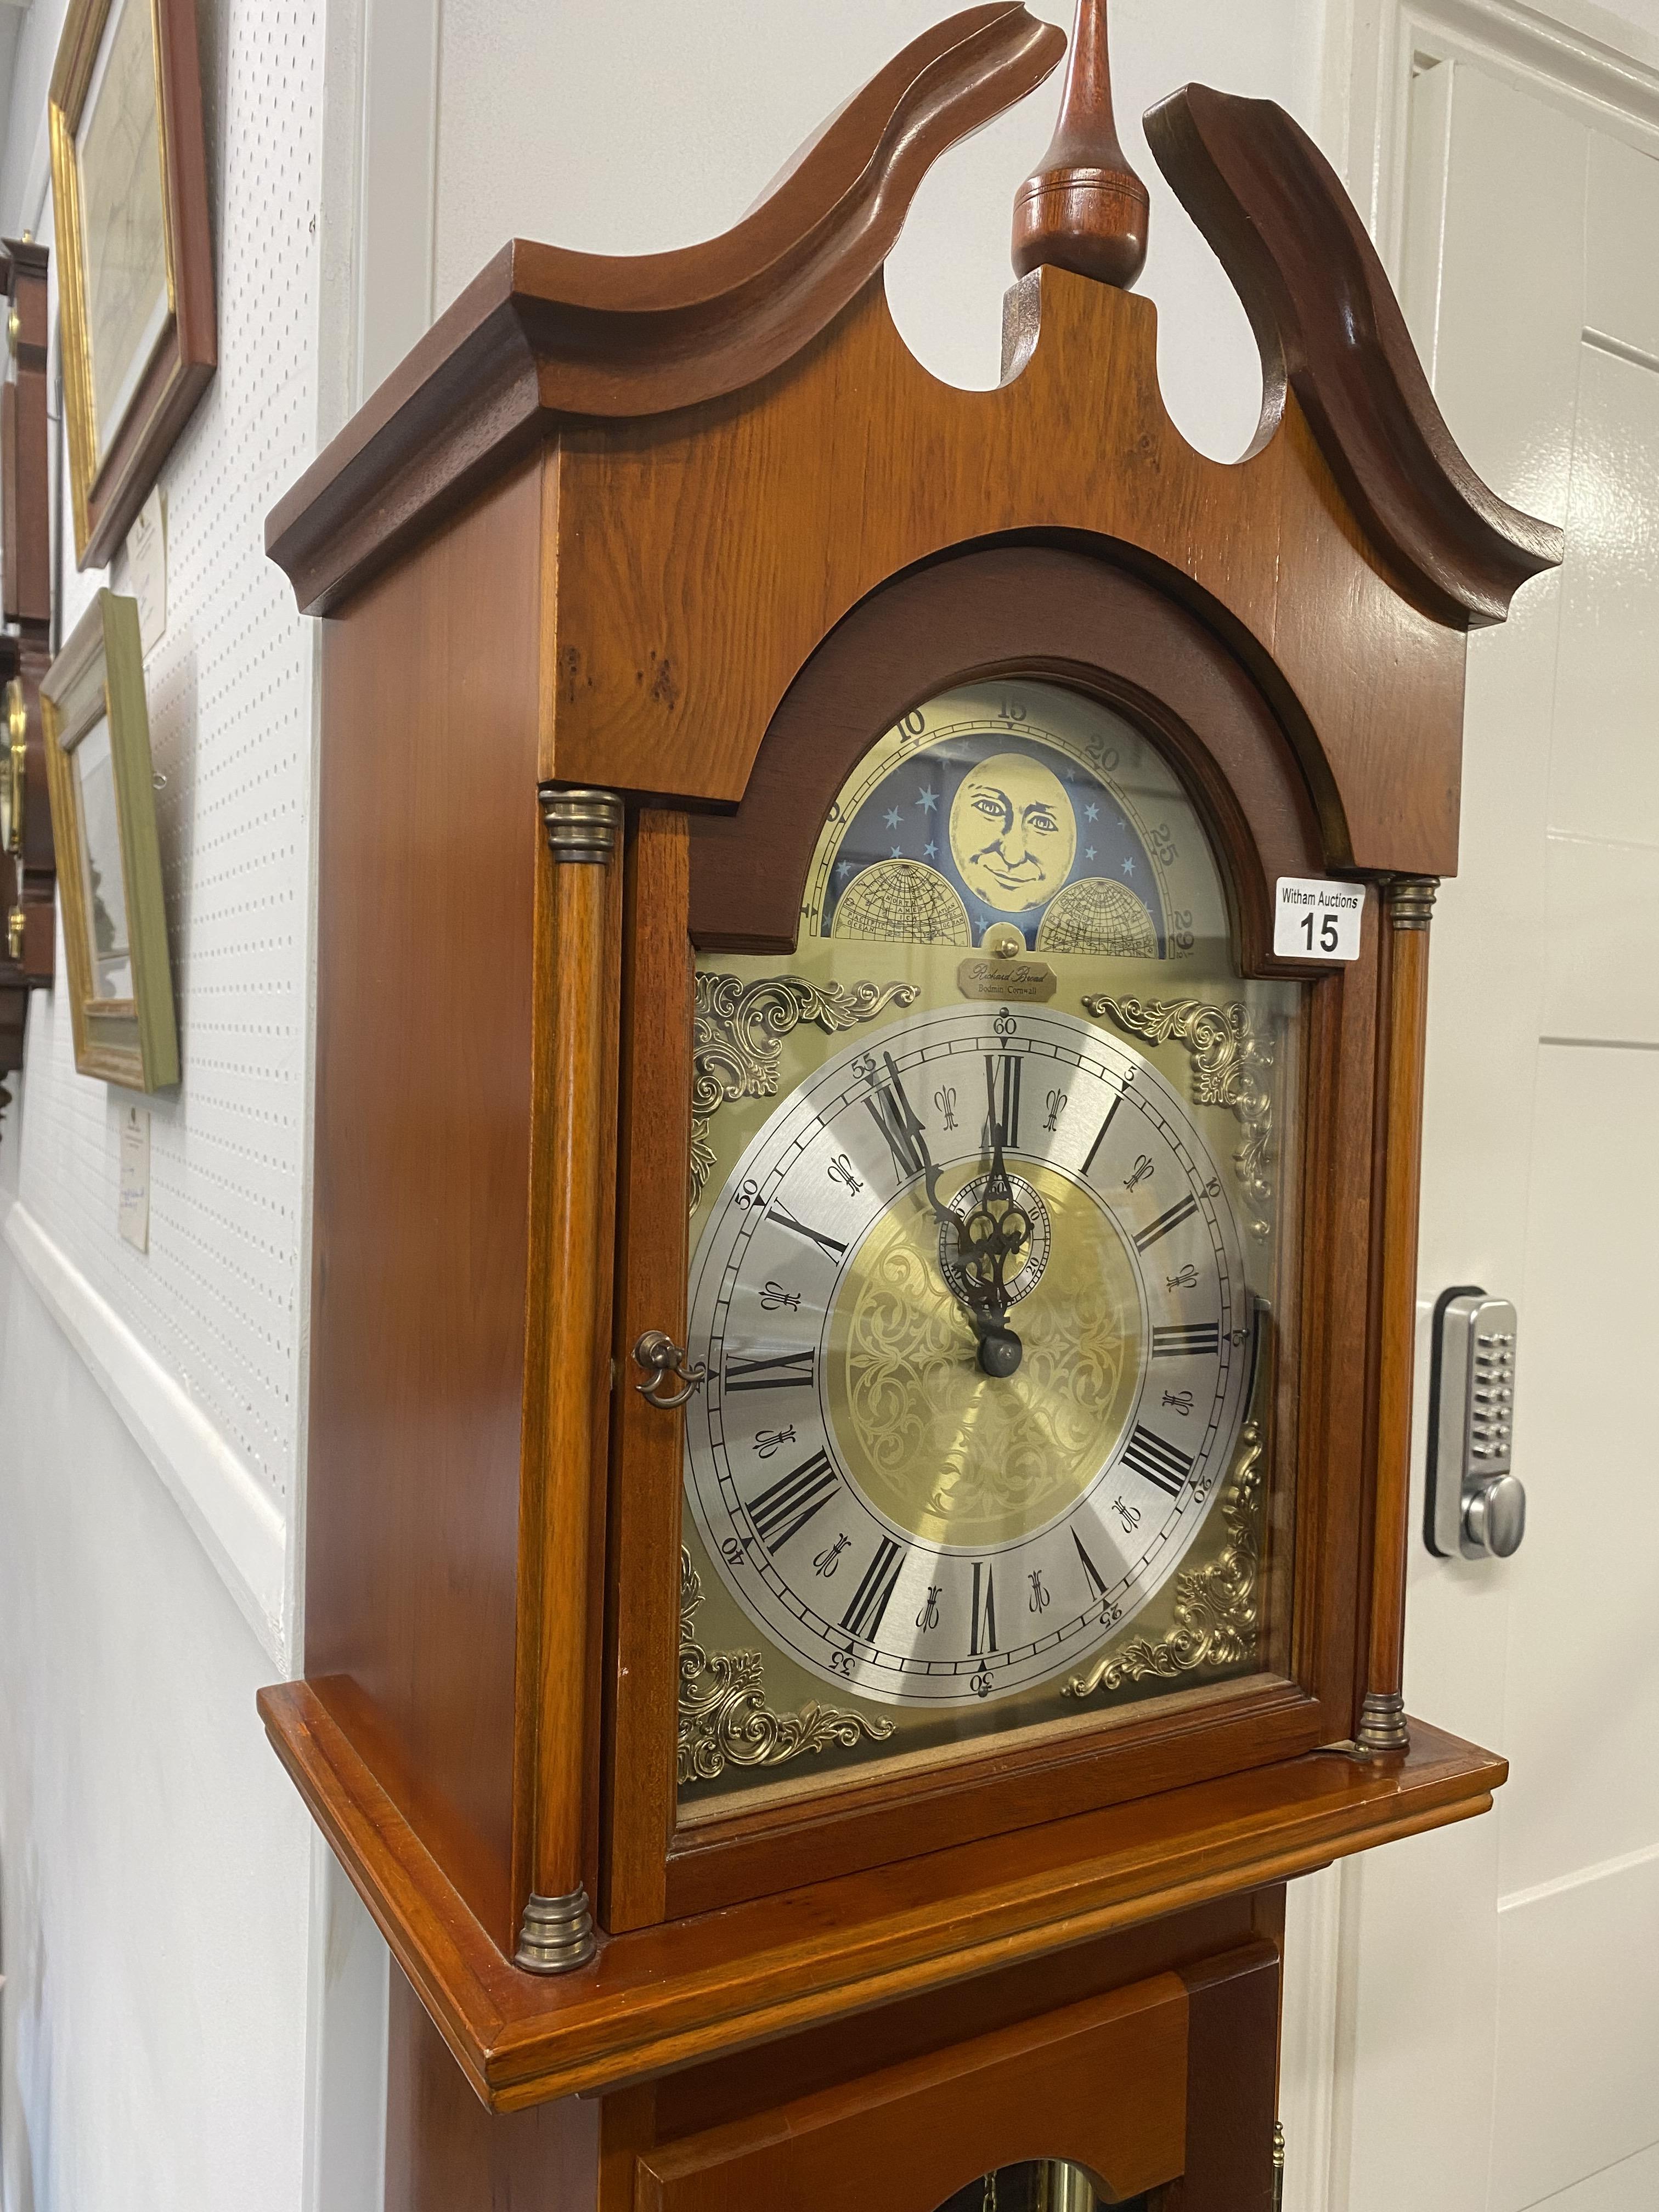 Richard Broad of Bodmin, Cornwall - Grandmother clock with arched brass and silvered dial with - Image 2 of 2